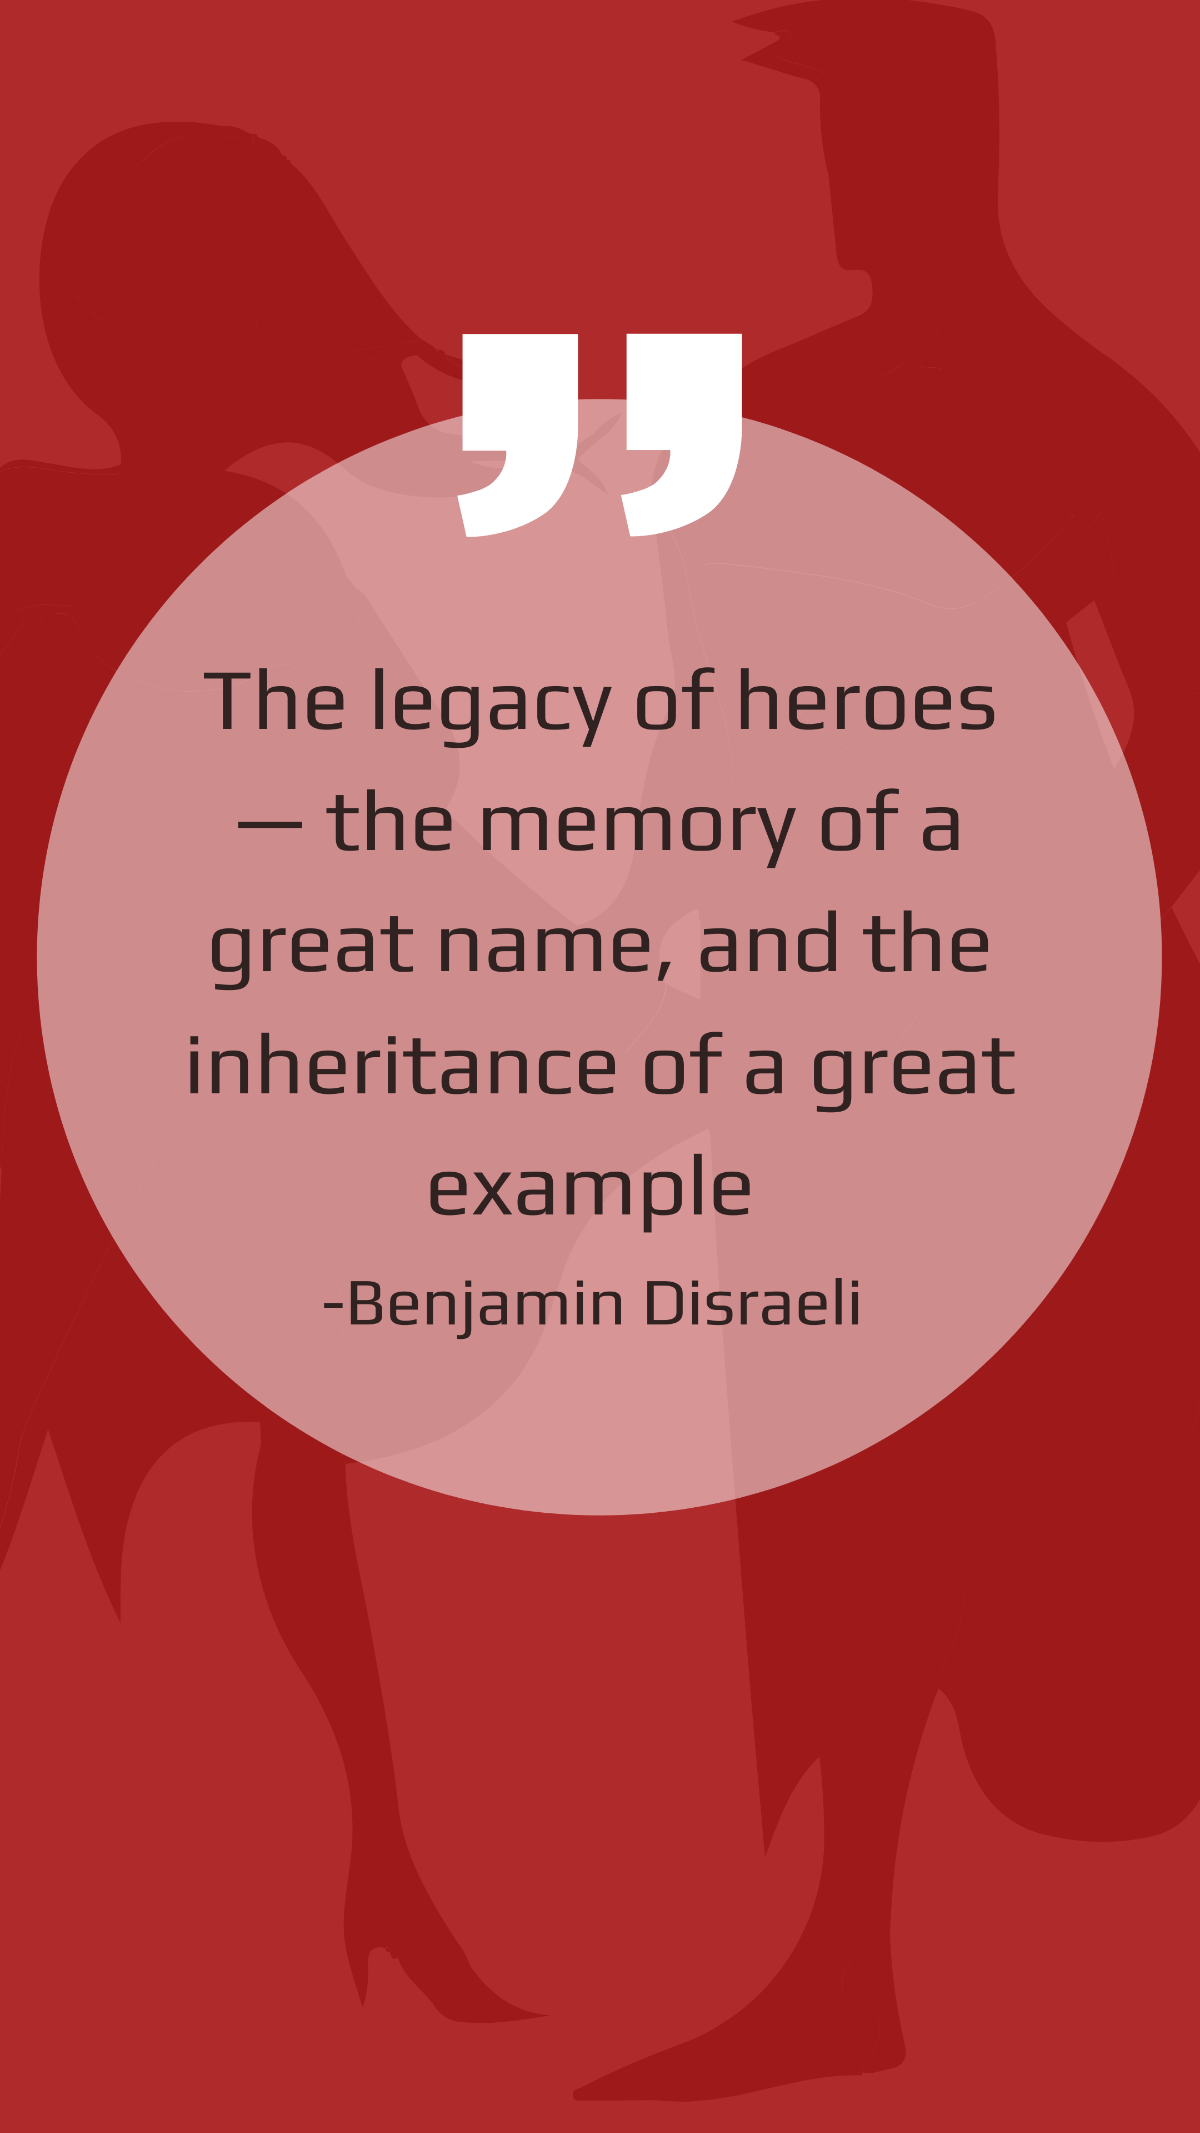 Benjamin Disraeli - The legacy of heroes — the memory of a great name, and the inheritance of a great example Template